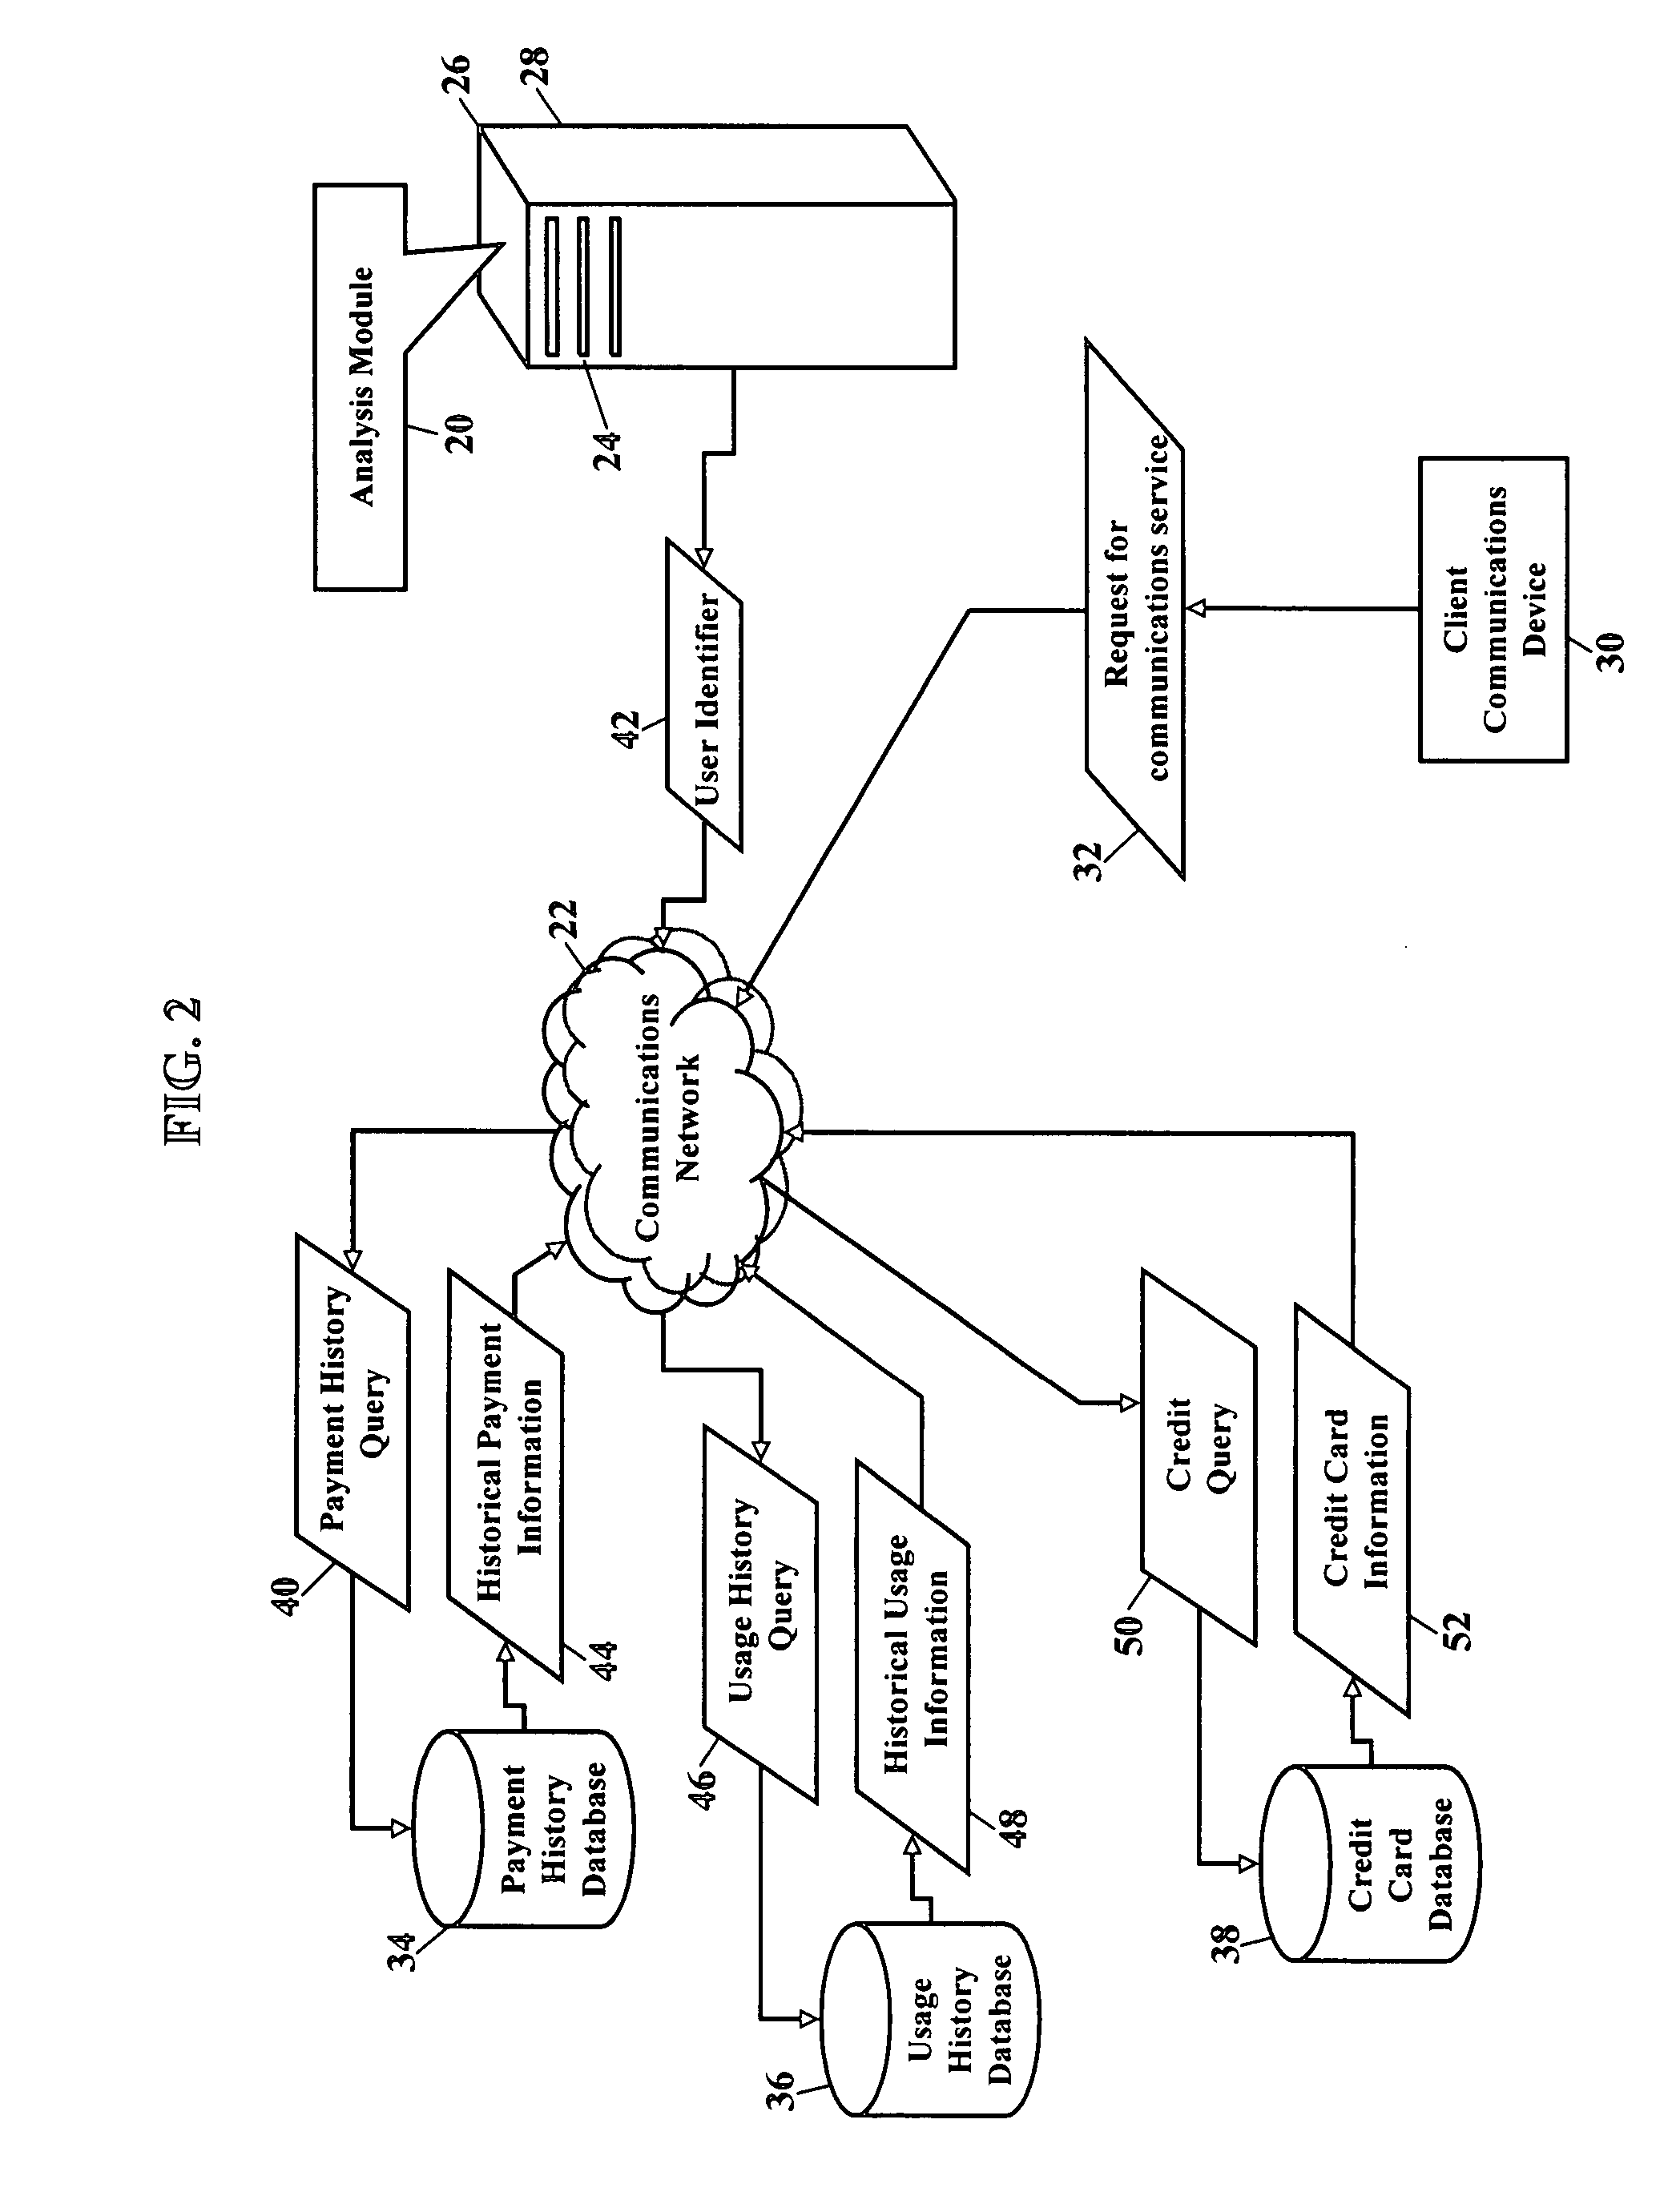 Methods, systems, and products for providing communications services